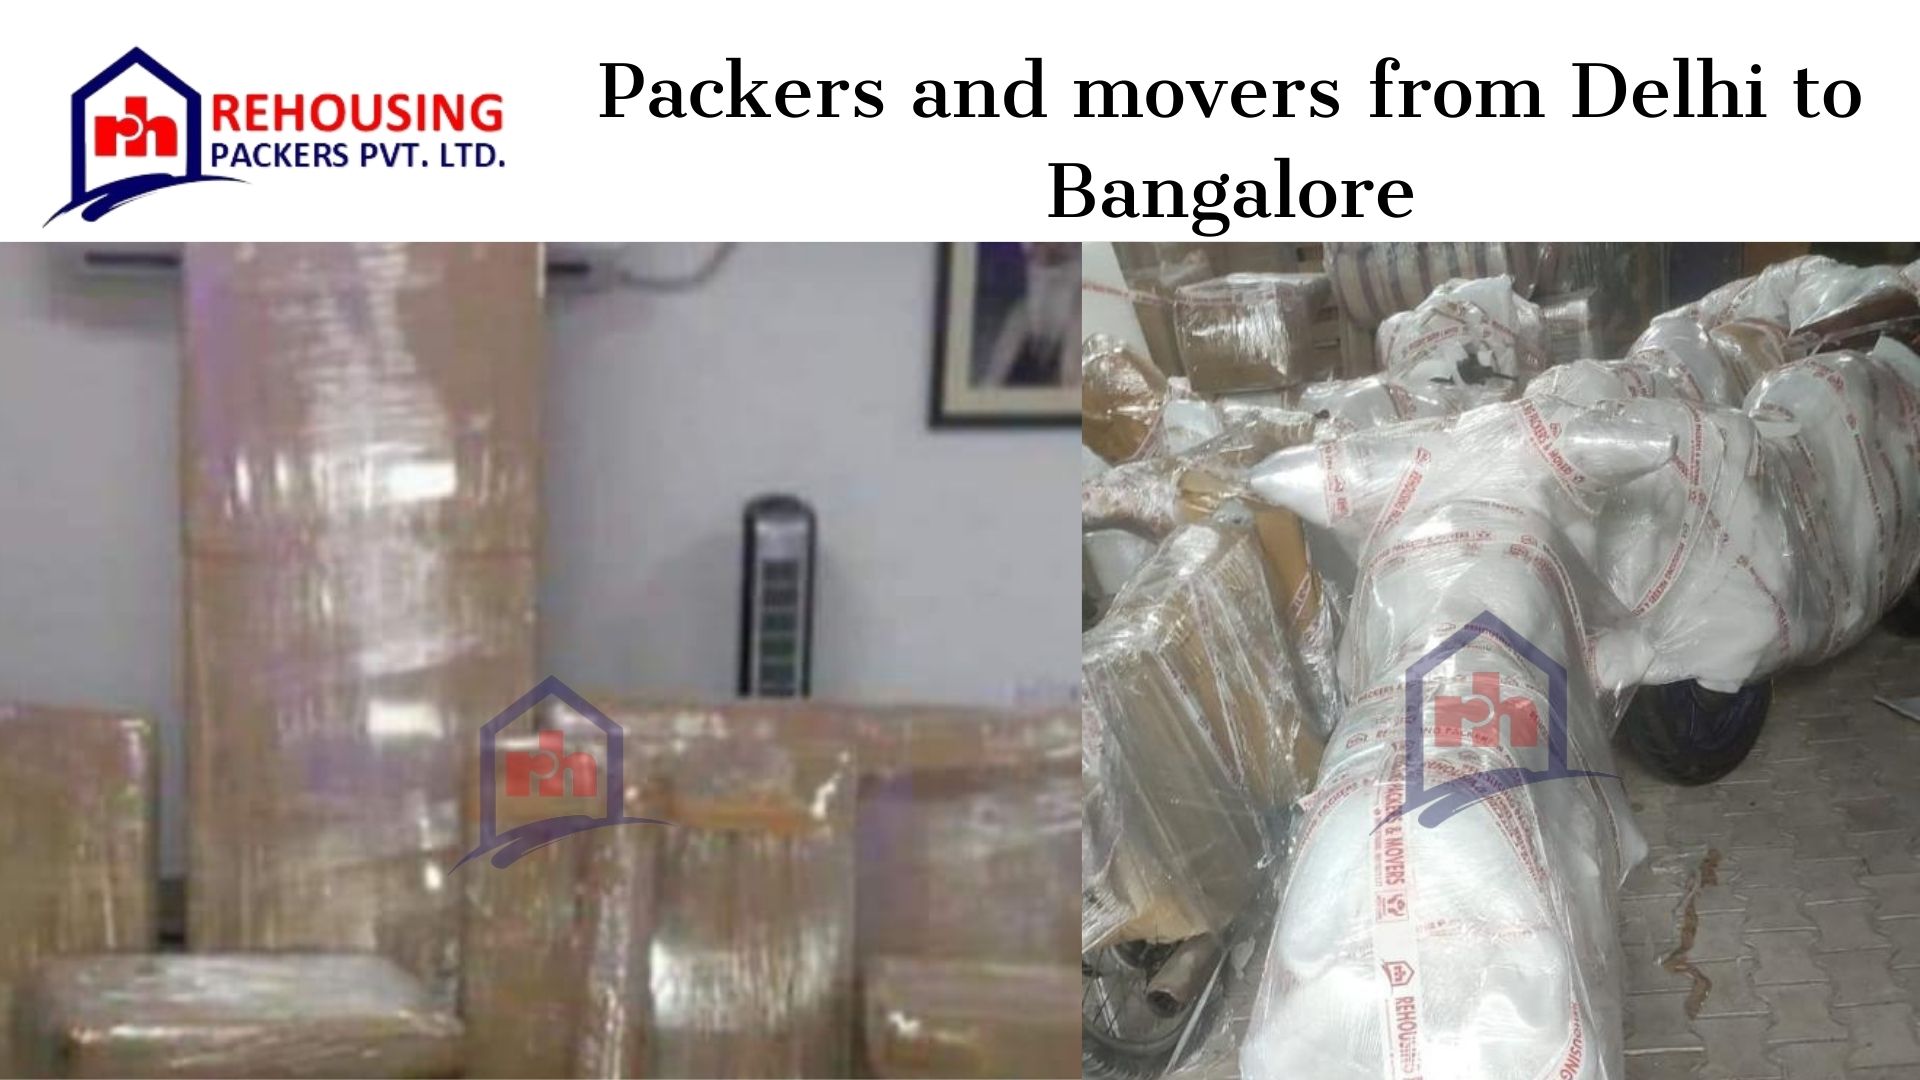 Packers and Movers from Delhi to Bangalore | Charges Rehousing